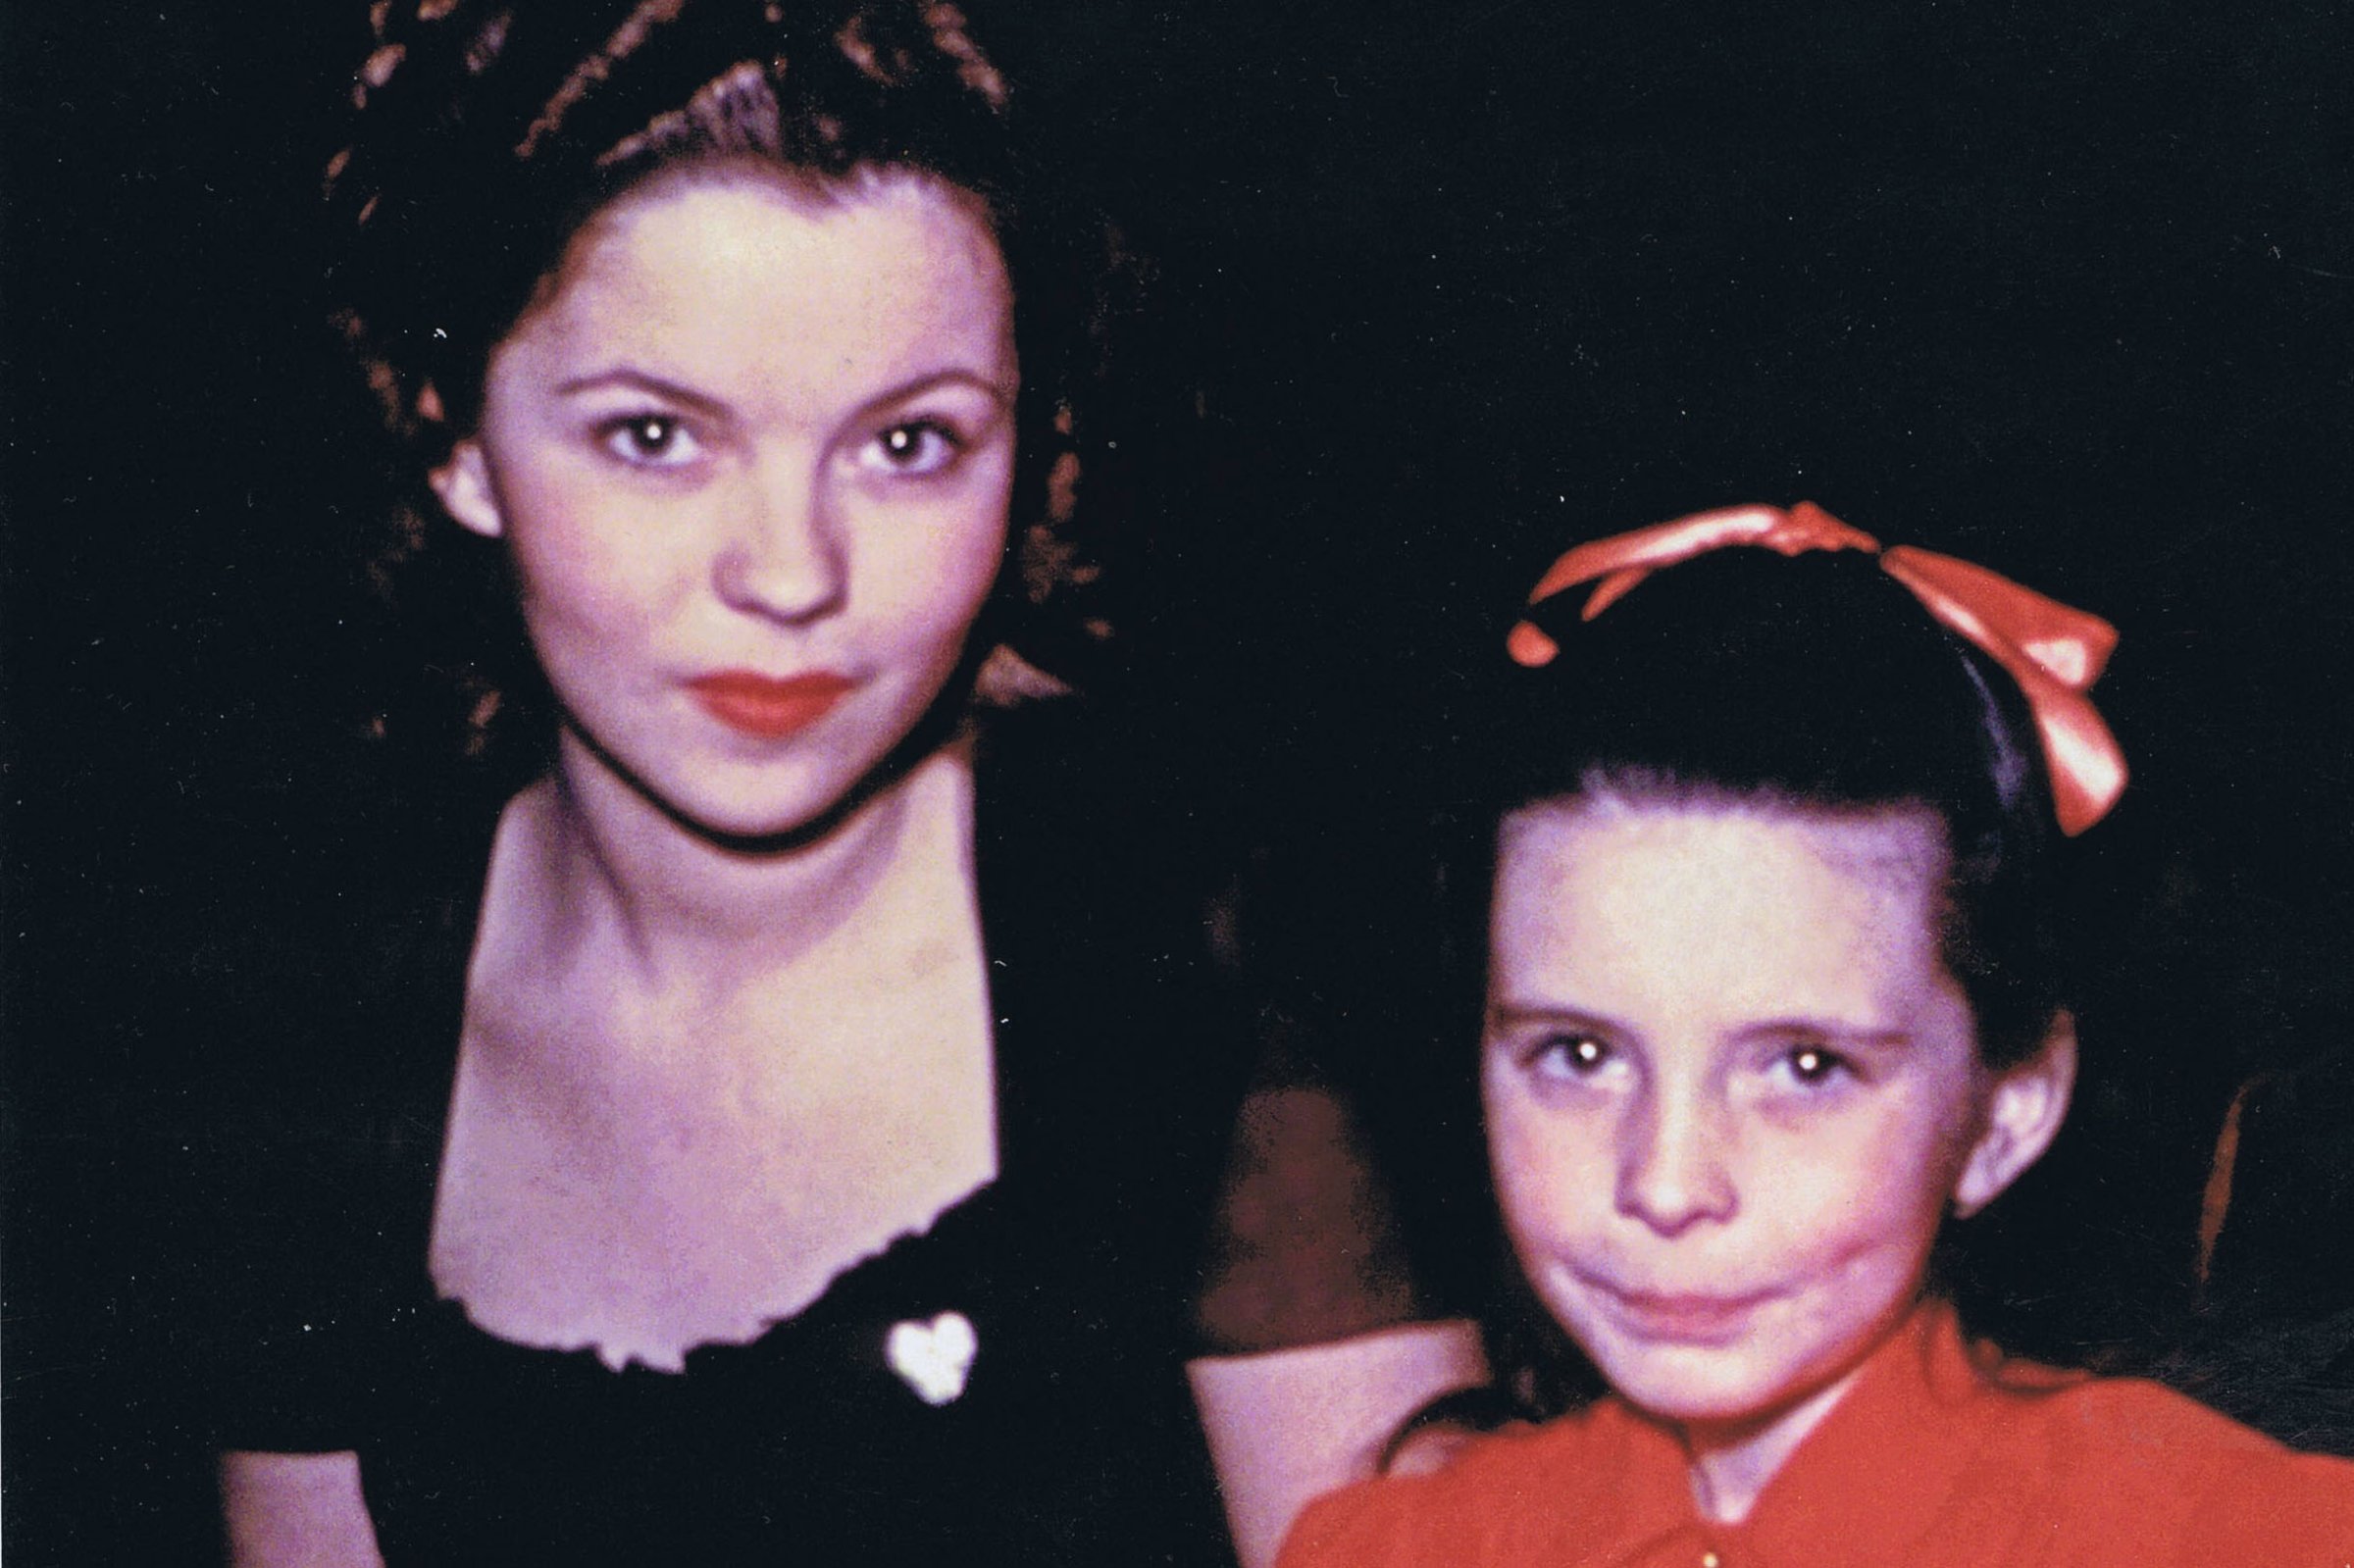 Temple (l.) and O'Brien (r.) at dinner on Valentine's in 1945.